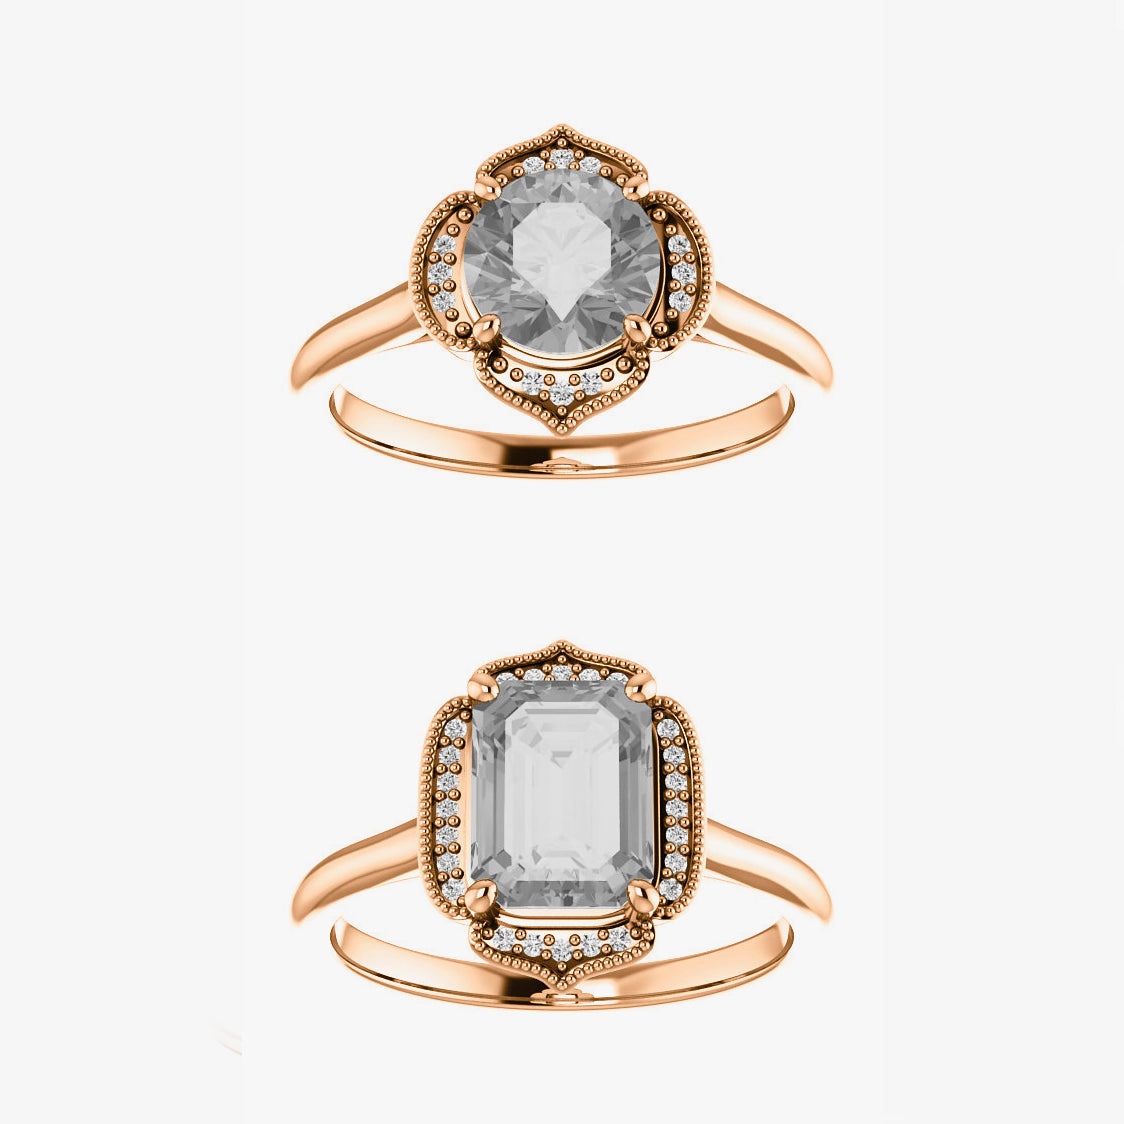 Clementine Setting - Midwinter Co. Alternative Bridal Rings and Modern Fine Jewelry